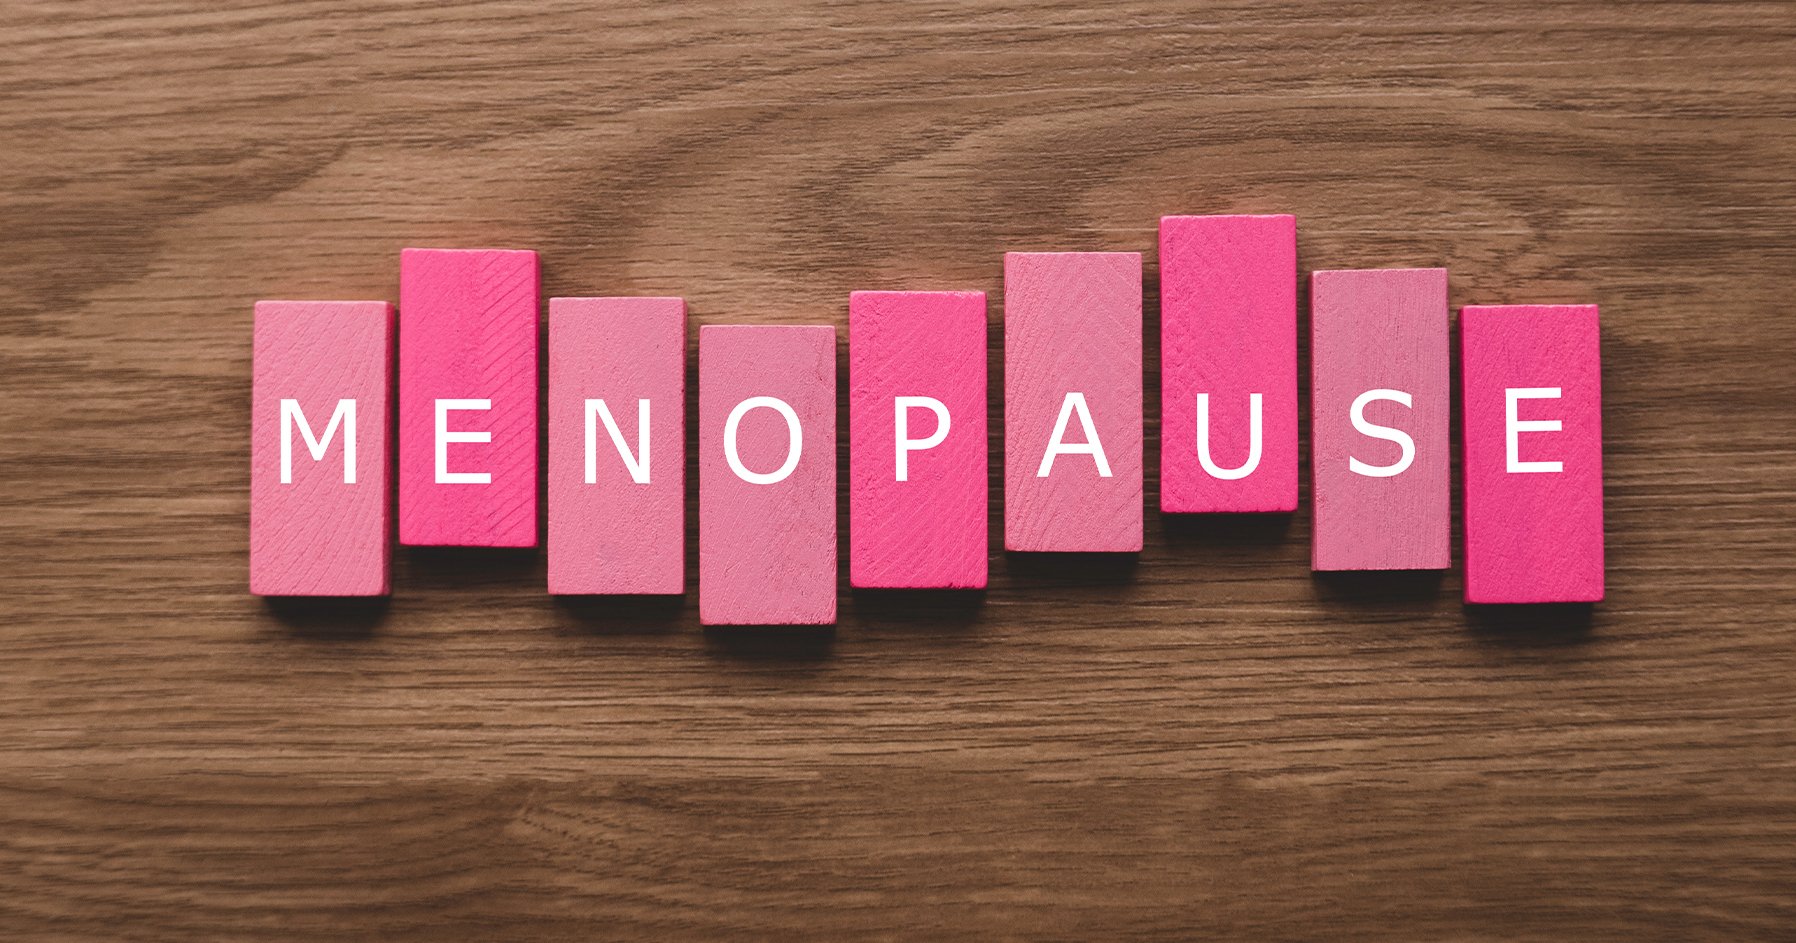 The years leading up to menopause (known as perimenopause) brings